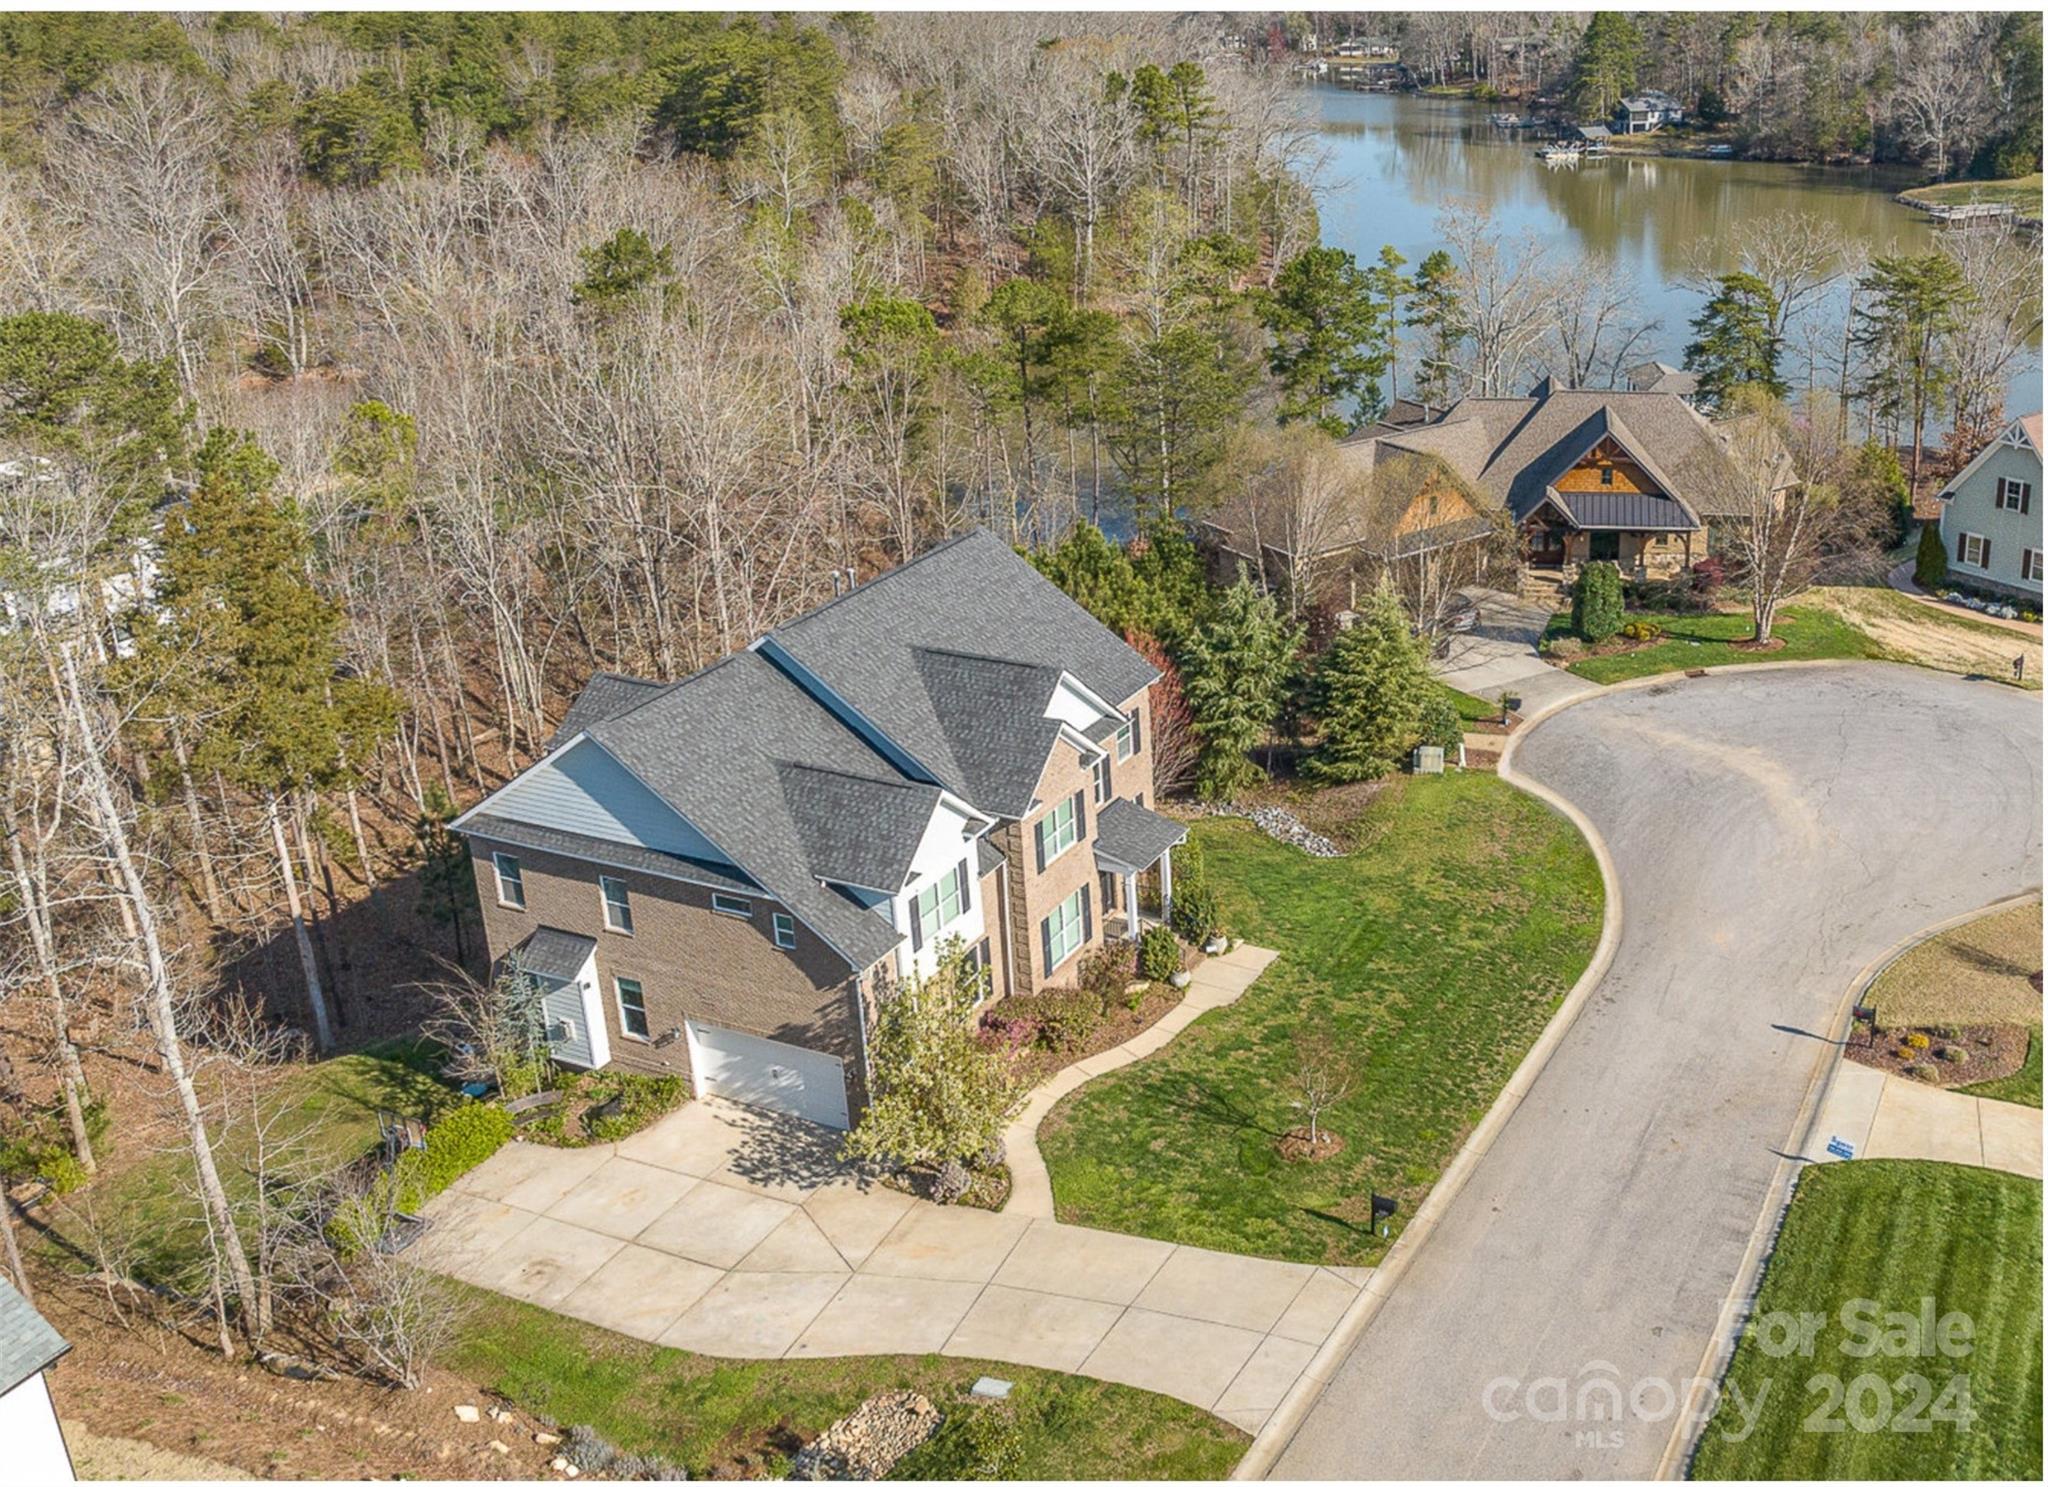 an aerial view of a house with outdoor space lake view